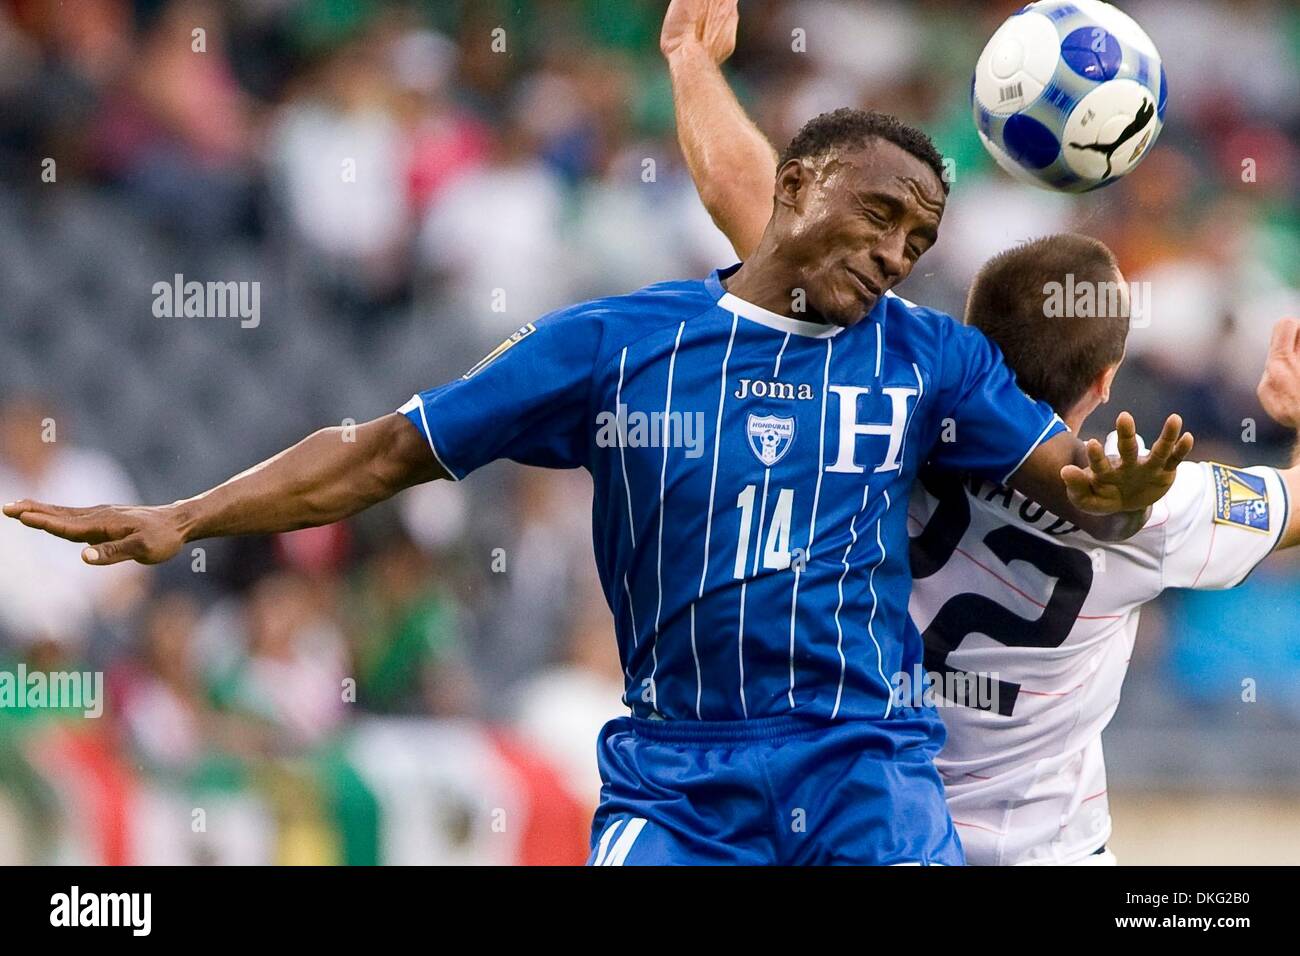 Jul 23, 2009 - Chicago, Illinois, USA - Honduras' CARLOS PALACIOS gets a header against USA during their semifinal game of the CONCACAF Gold Cup at Soldier Field in Chicago. USA won 2-0 to advance to the Final. (Credit Image: Â© Chris McGuire/Southcreek EMI/ZUMA Press) Stock Photo